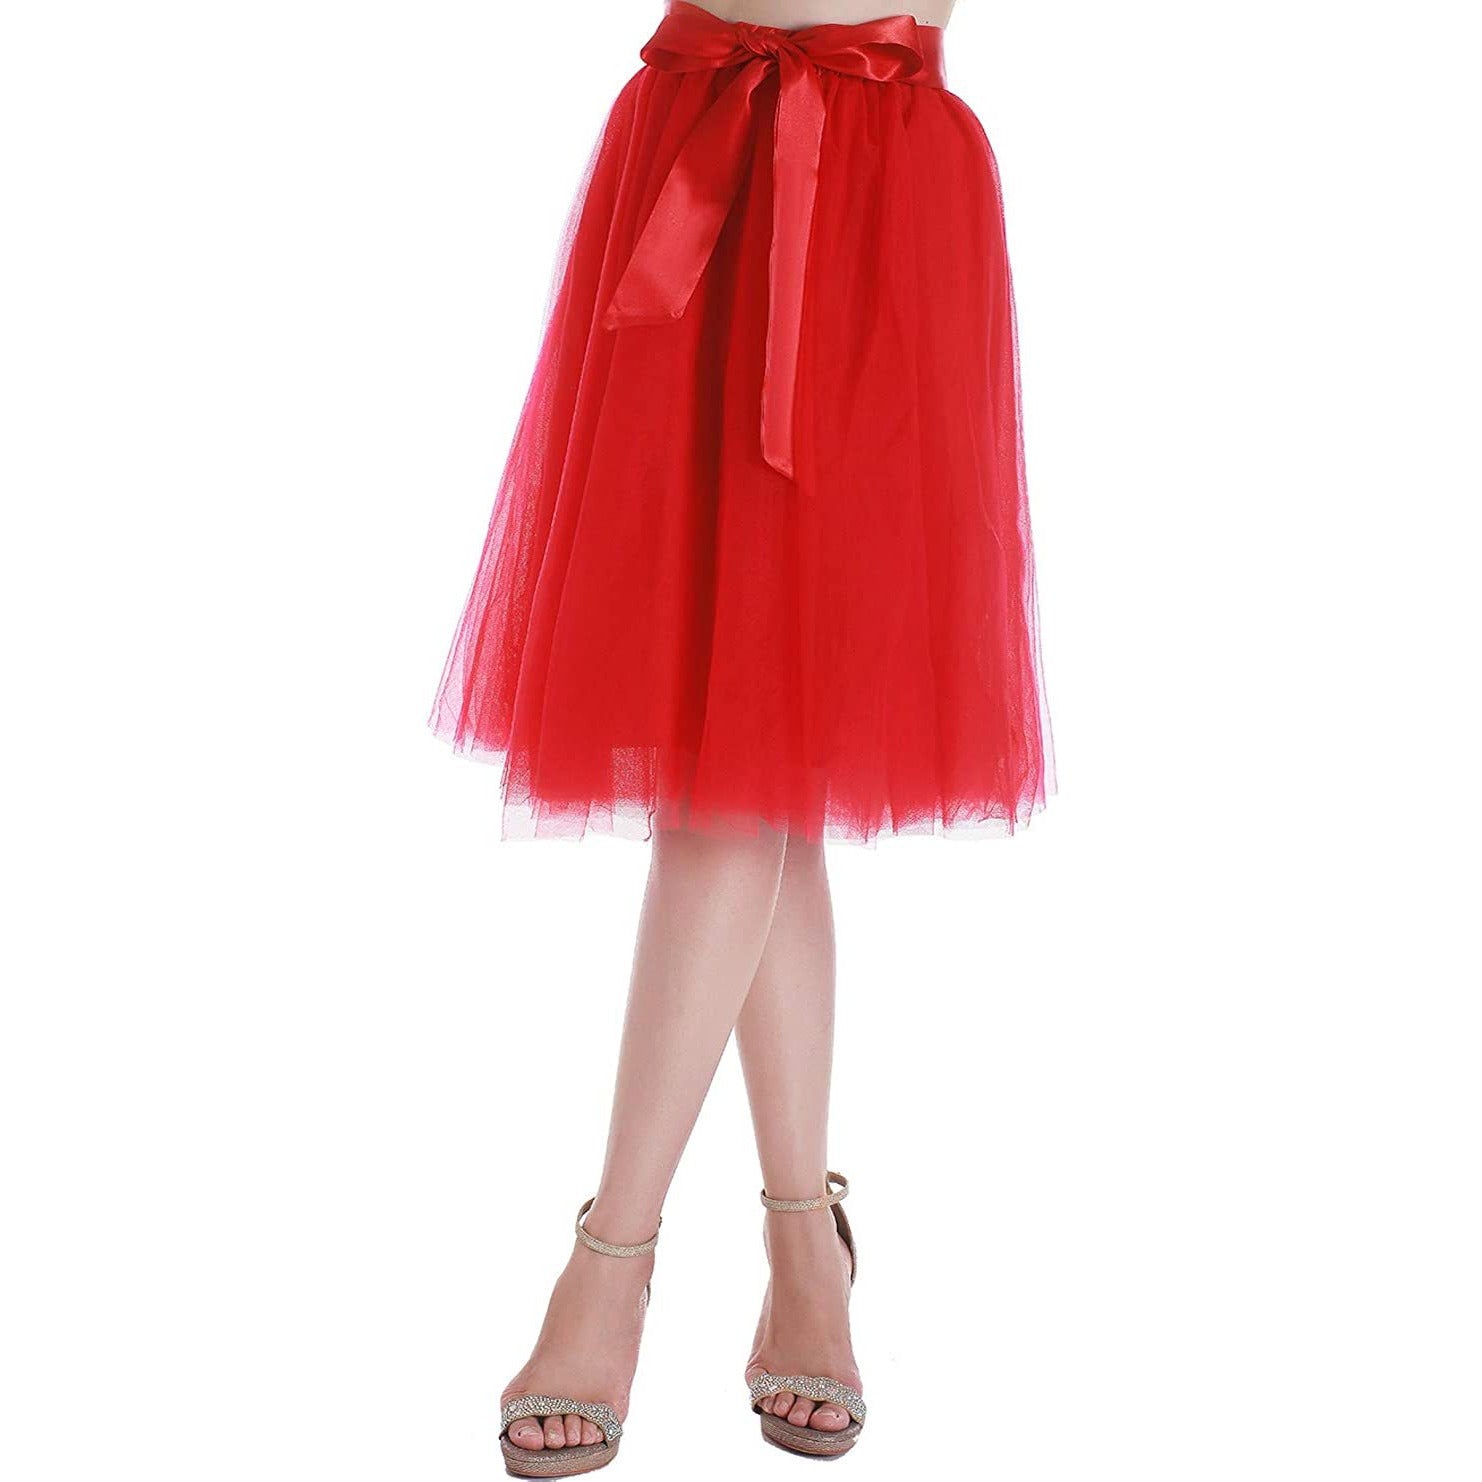 Dancina Women's A-Line Tea Length Midi Tulle Skirt - Regular and Plus Size in Bright Red